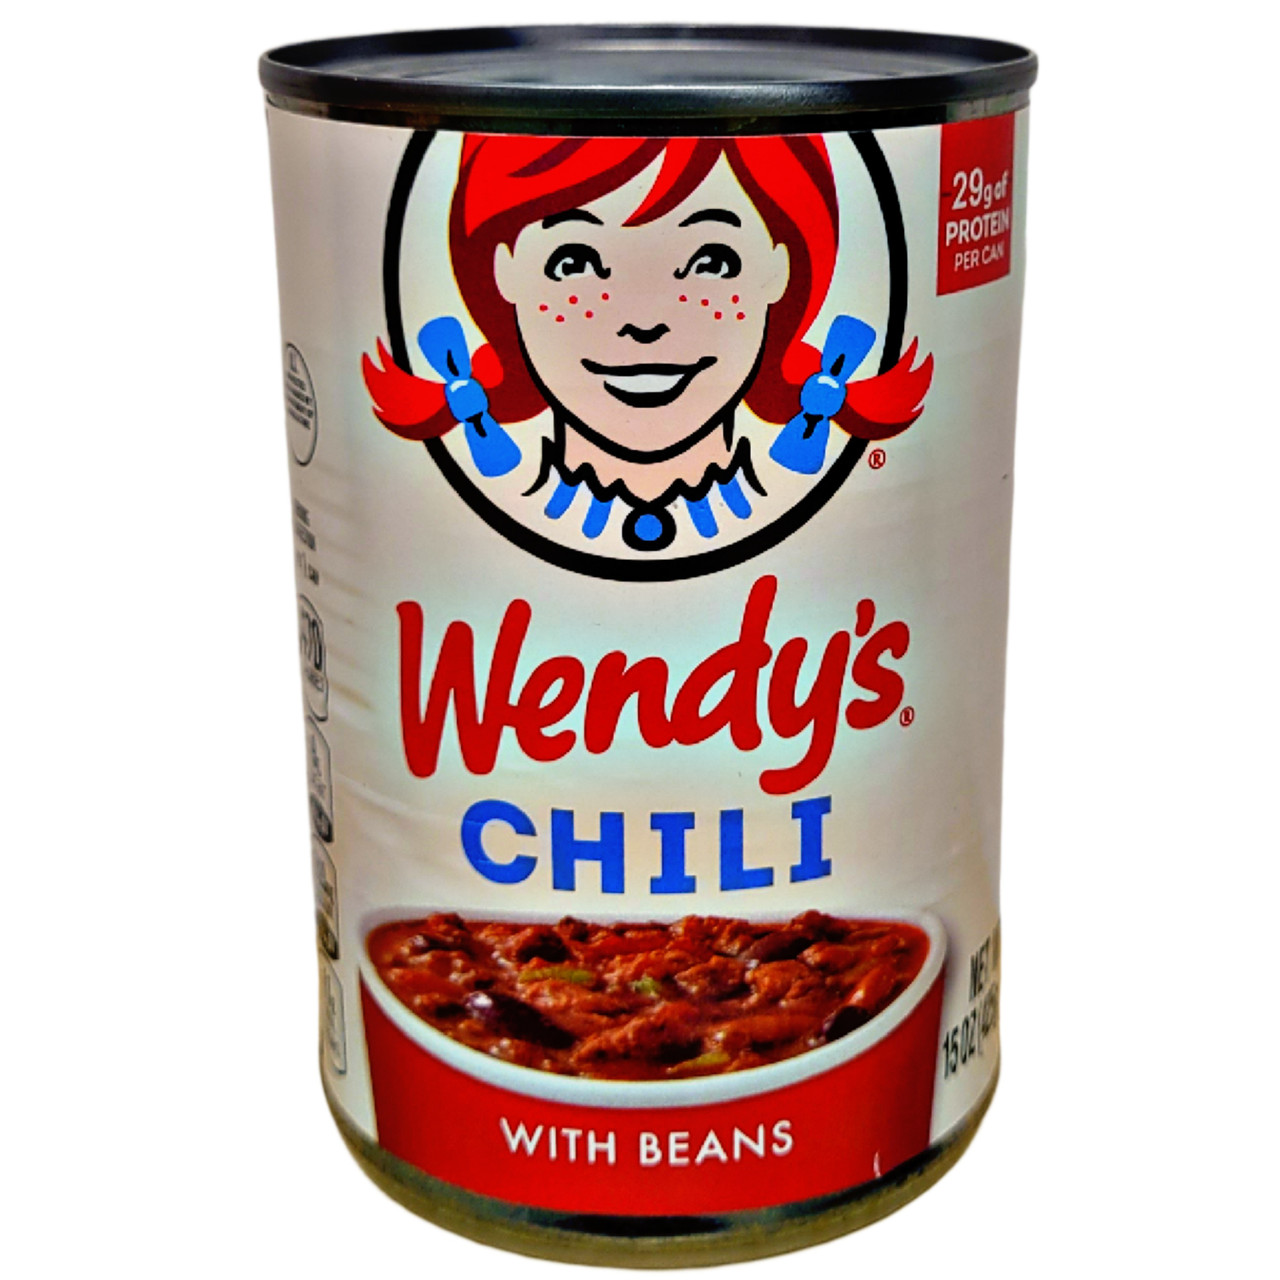 Wendys Chilli in a Can